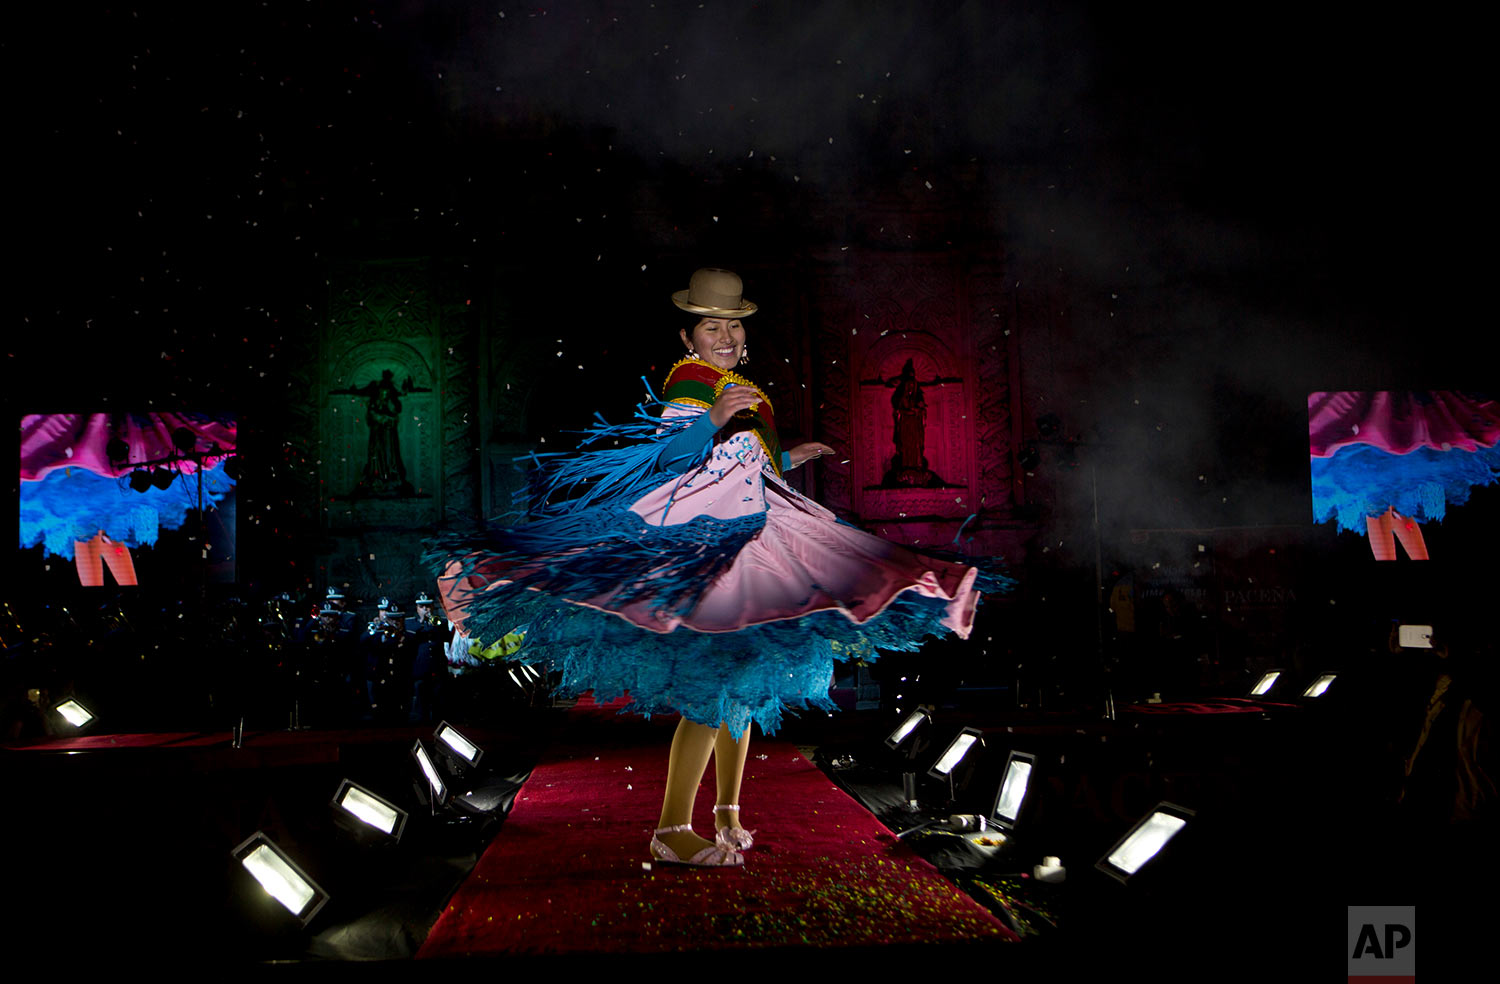  A woman turns on the catwalk during Miss Cholita beauty pageant in La Paz, Bolivia, June 29, 2018, an annual contest recognizing indigenous women's fashion, beauty, command of indigenous lifestyle and language. (AP Photo/Juan Karita) 